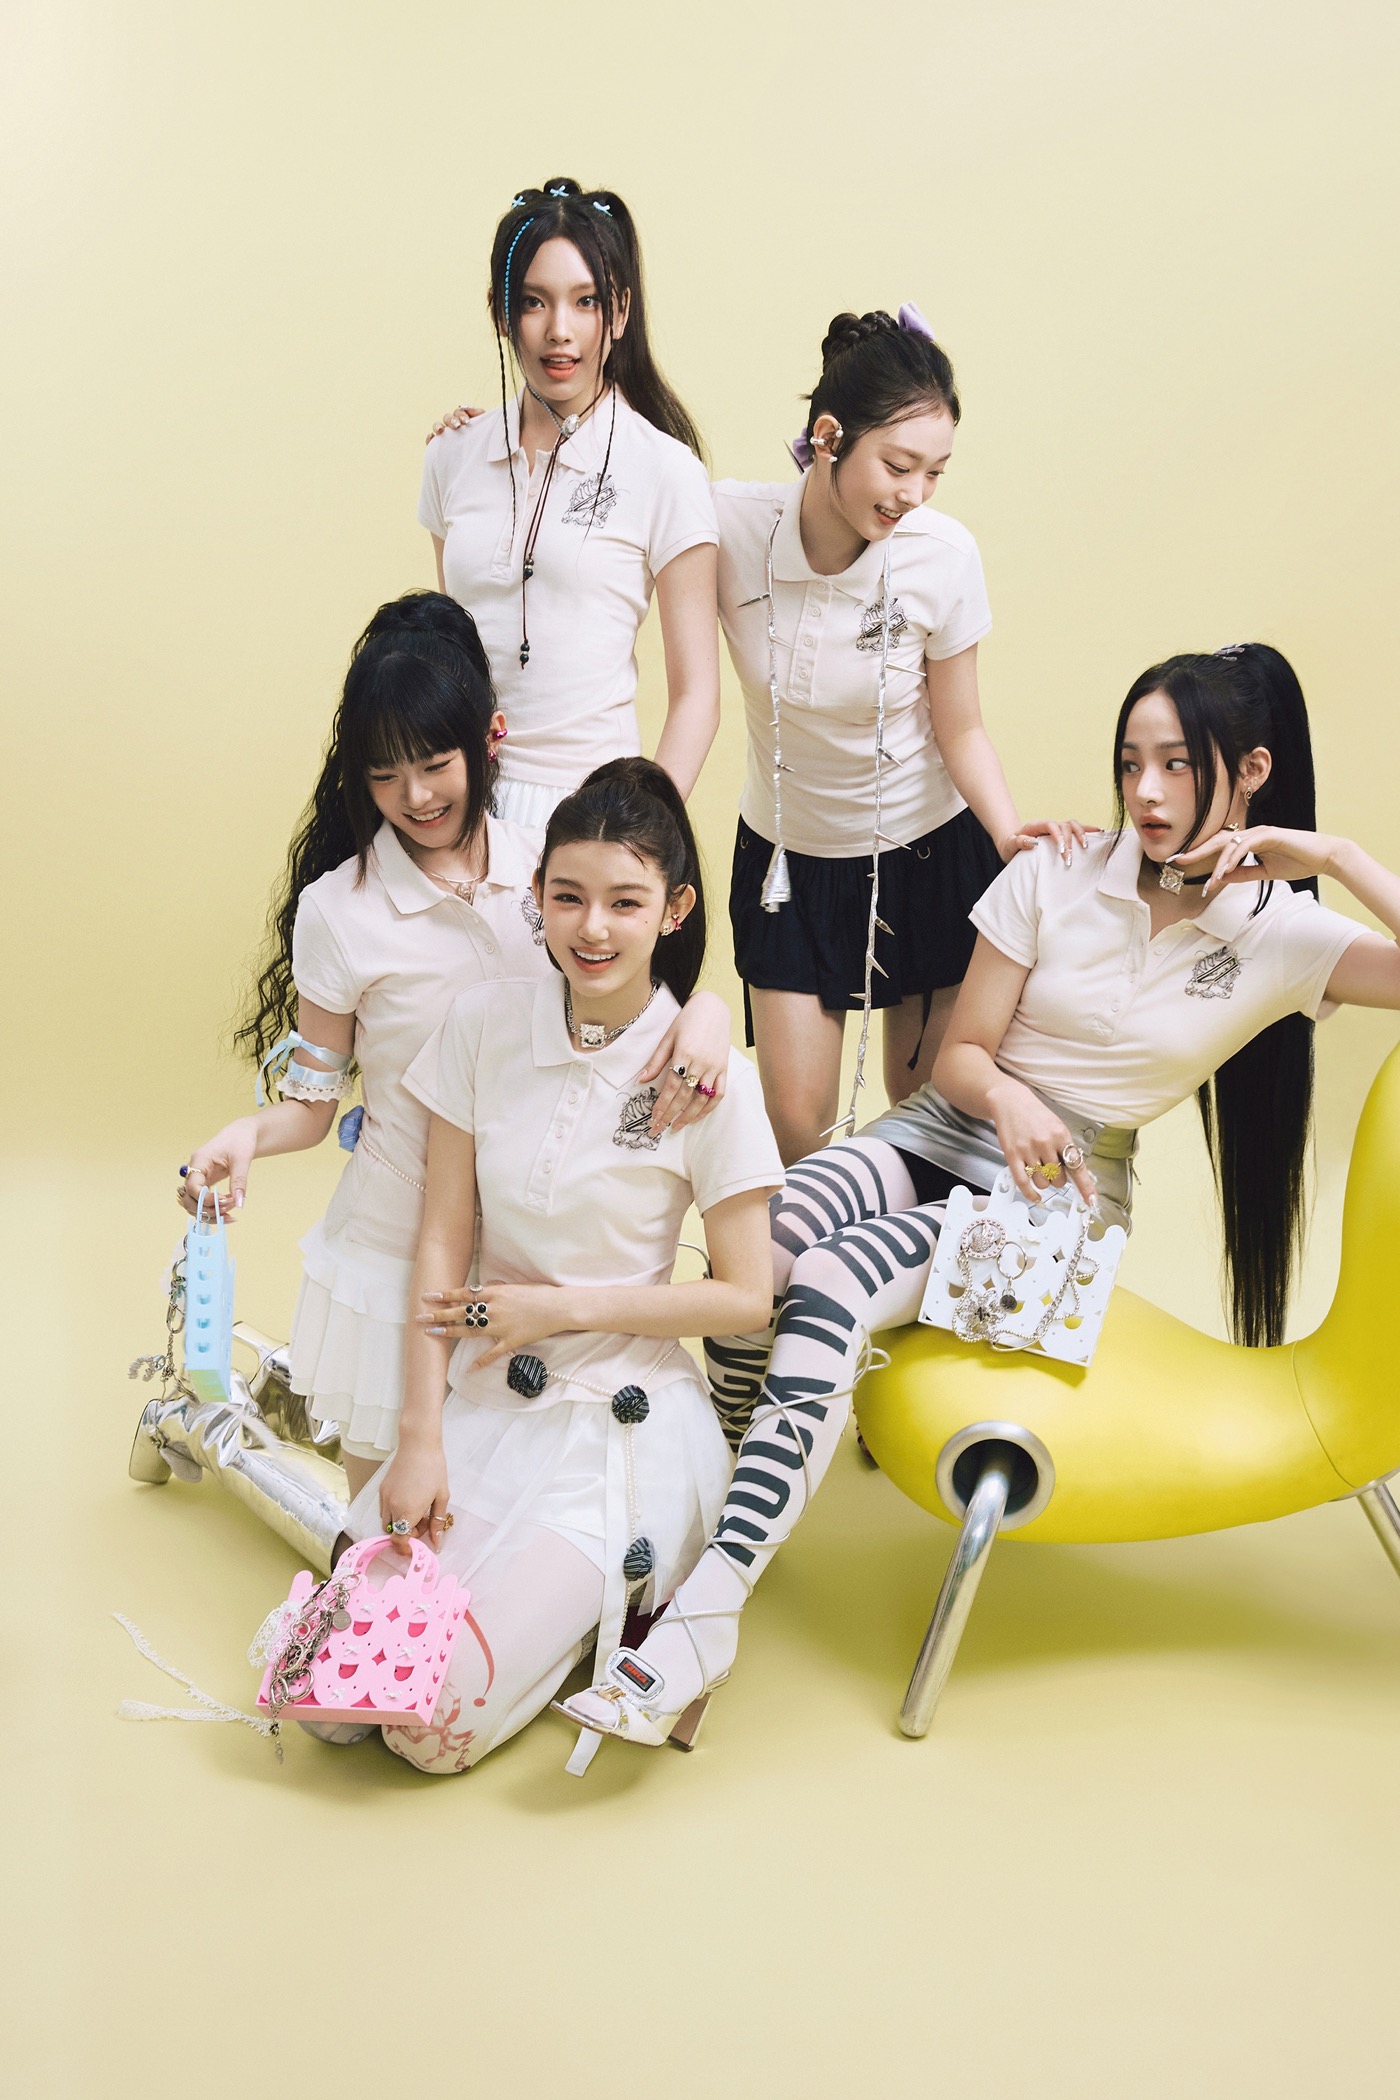 NewJeans、2nd EP『Get Up』をリリース！ 先行注文数は172万枚を記録 - 画像一覧（1/1）